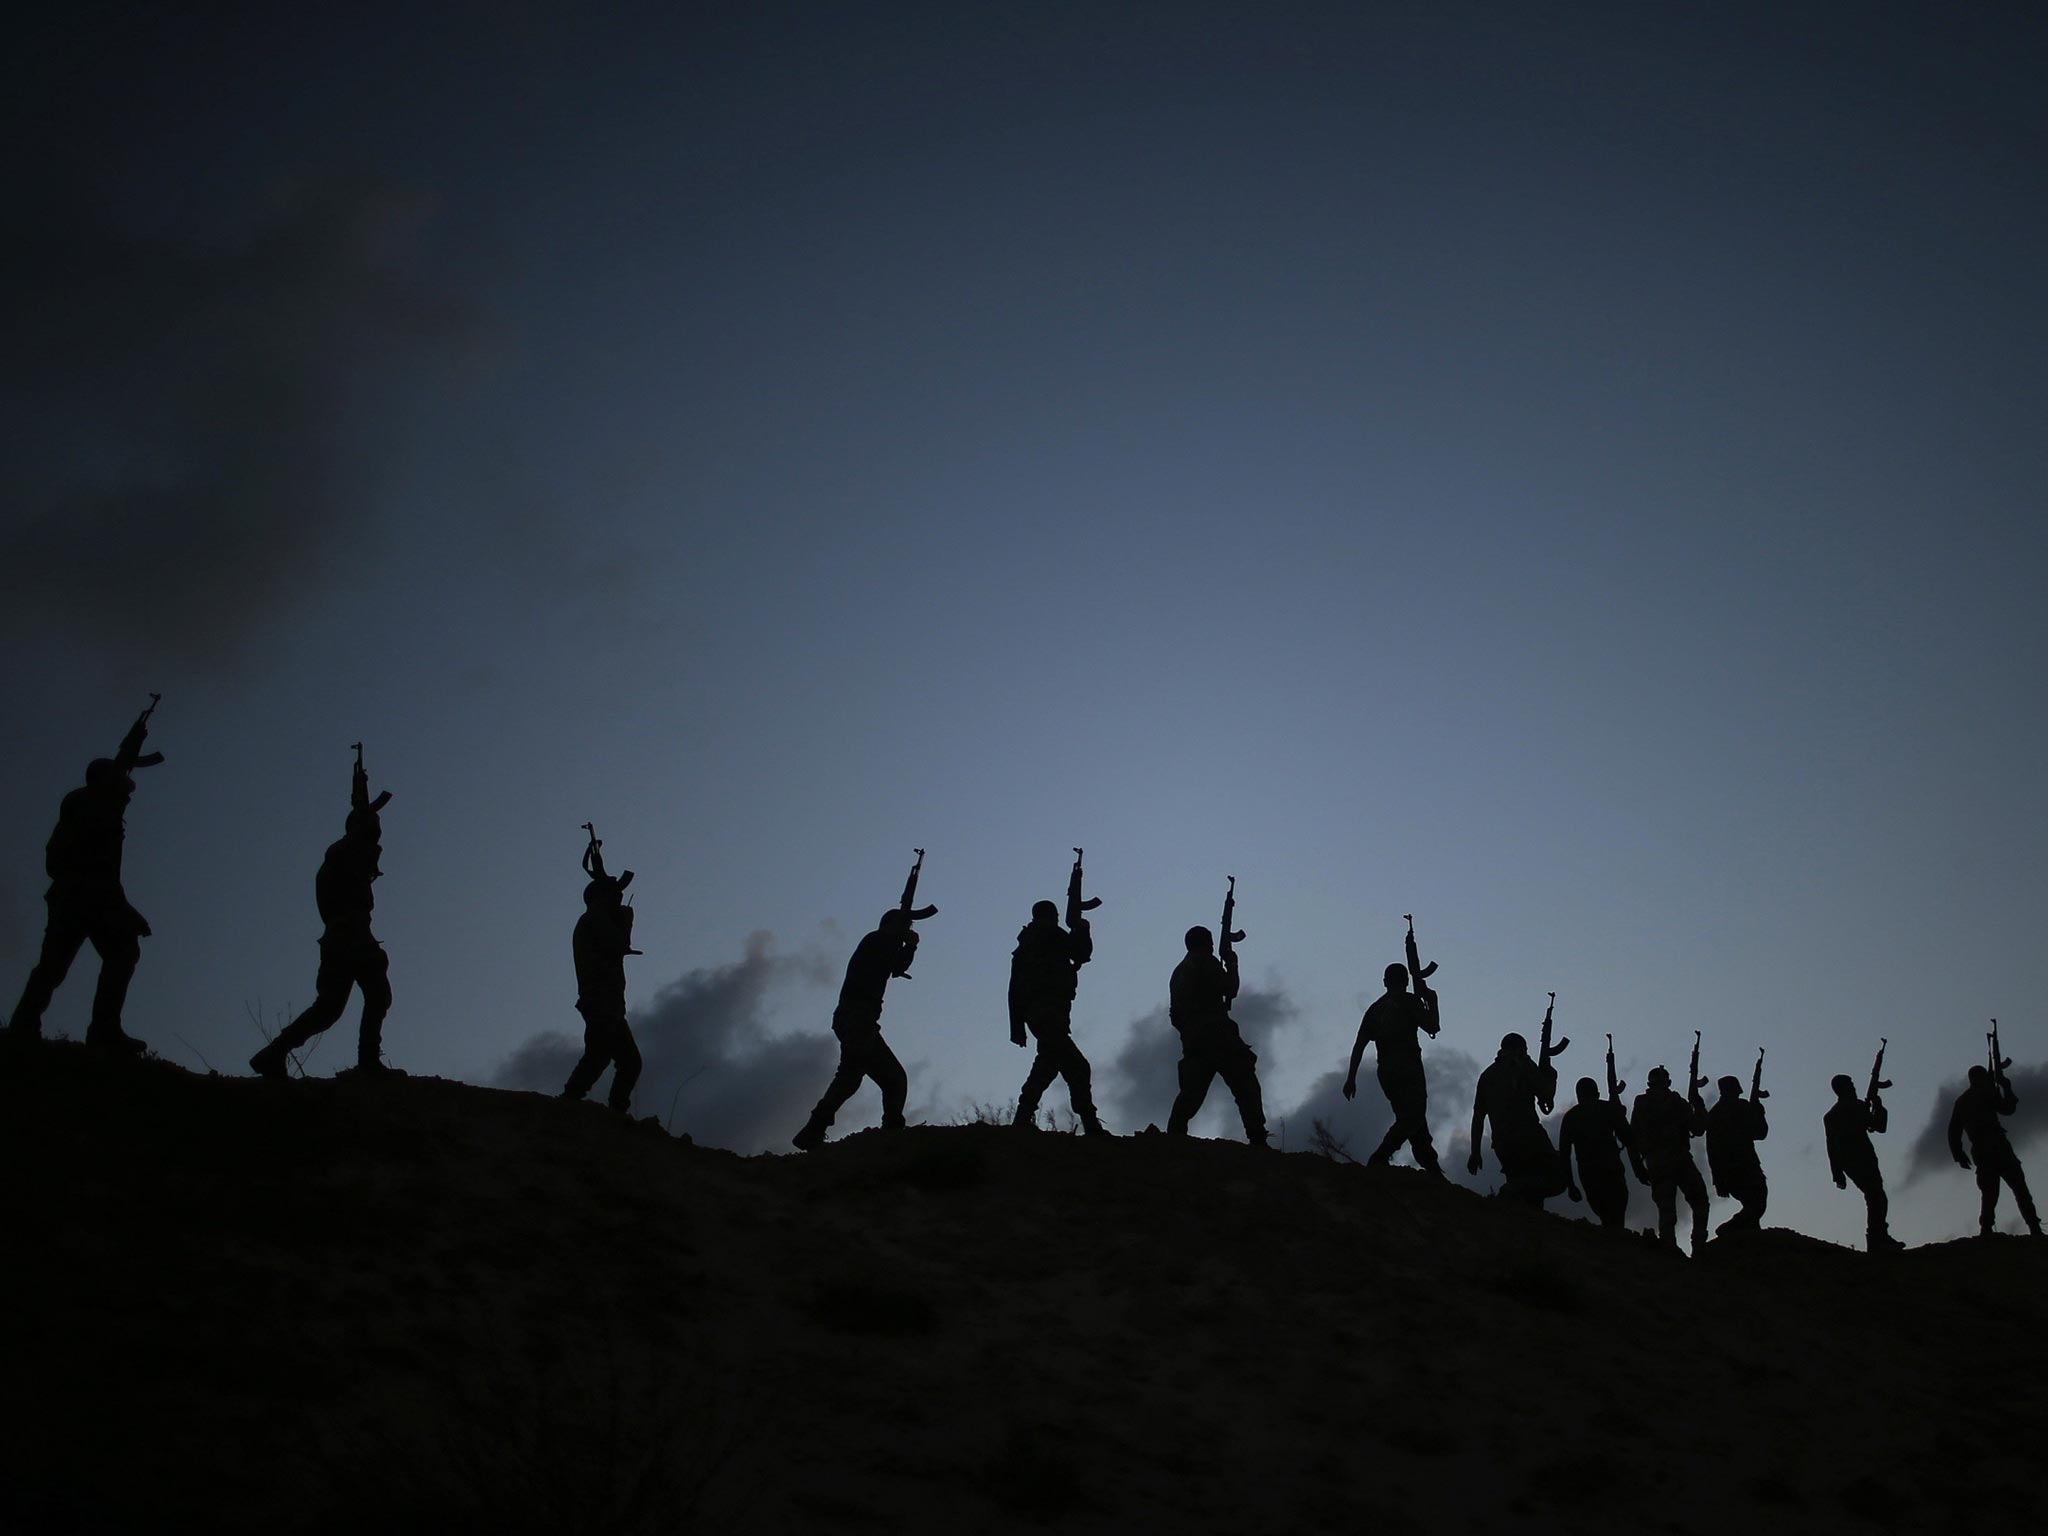 Palestinian Hamas militants march during a training exercise in Gaza